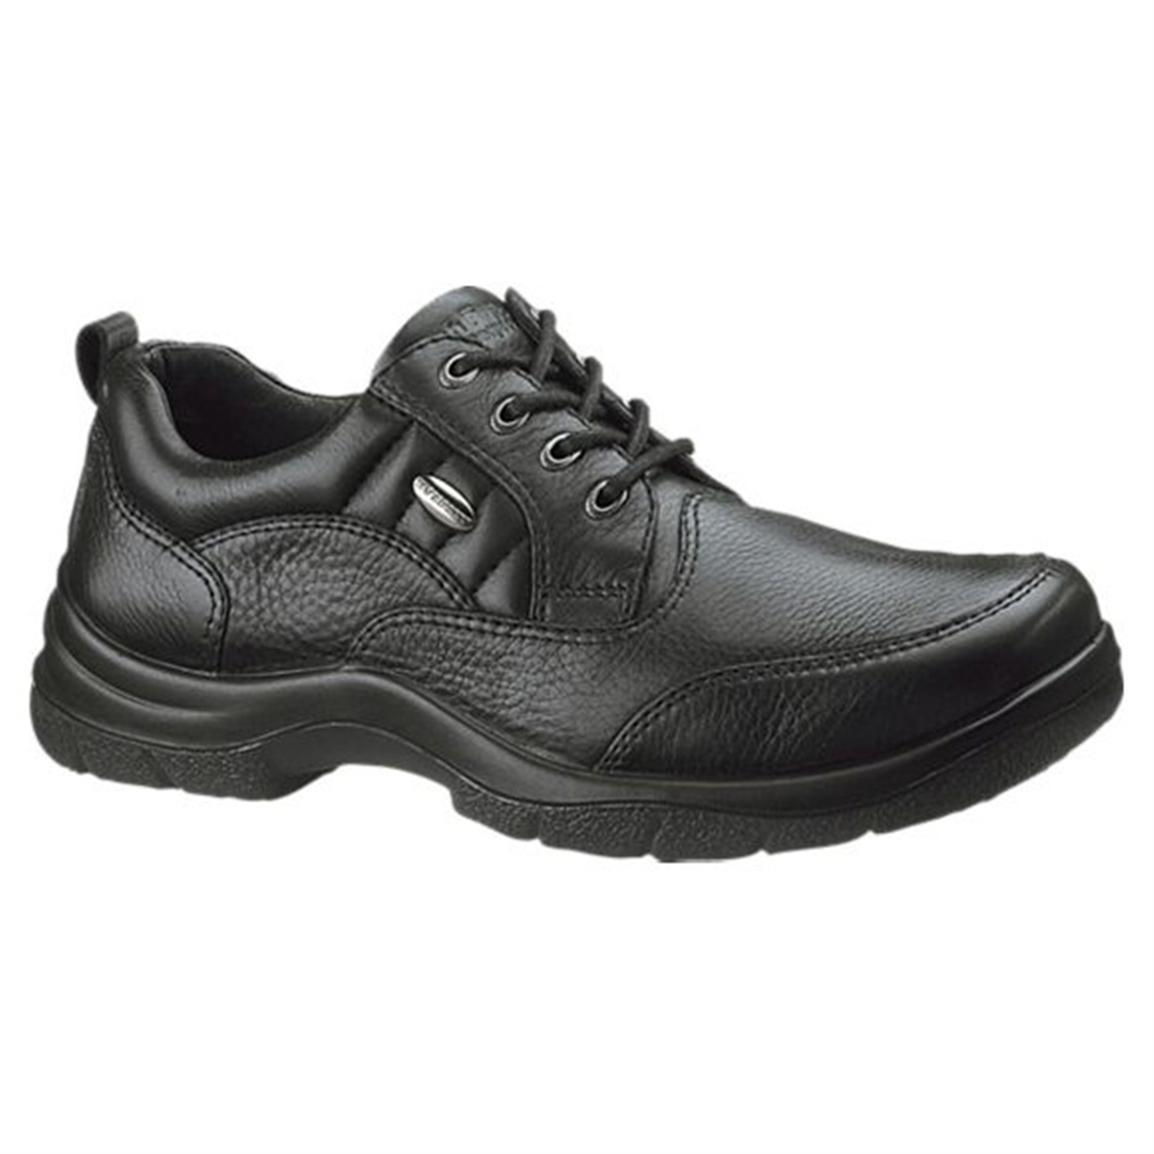 Men's Hush Puppies® Stamina Shoes - 164475, Casual Shoes at Sportsman's Guide